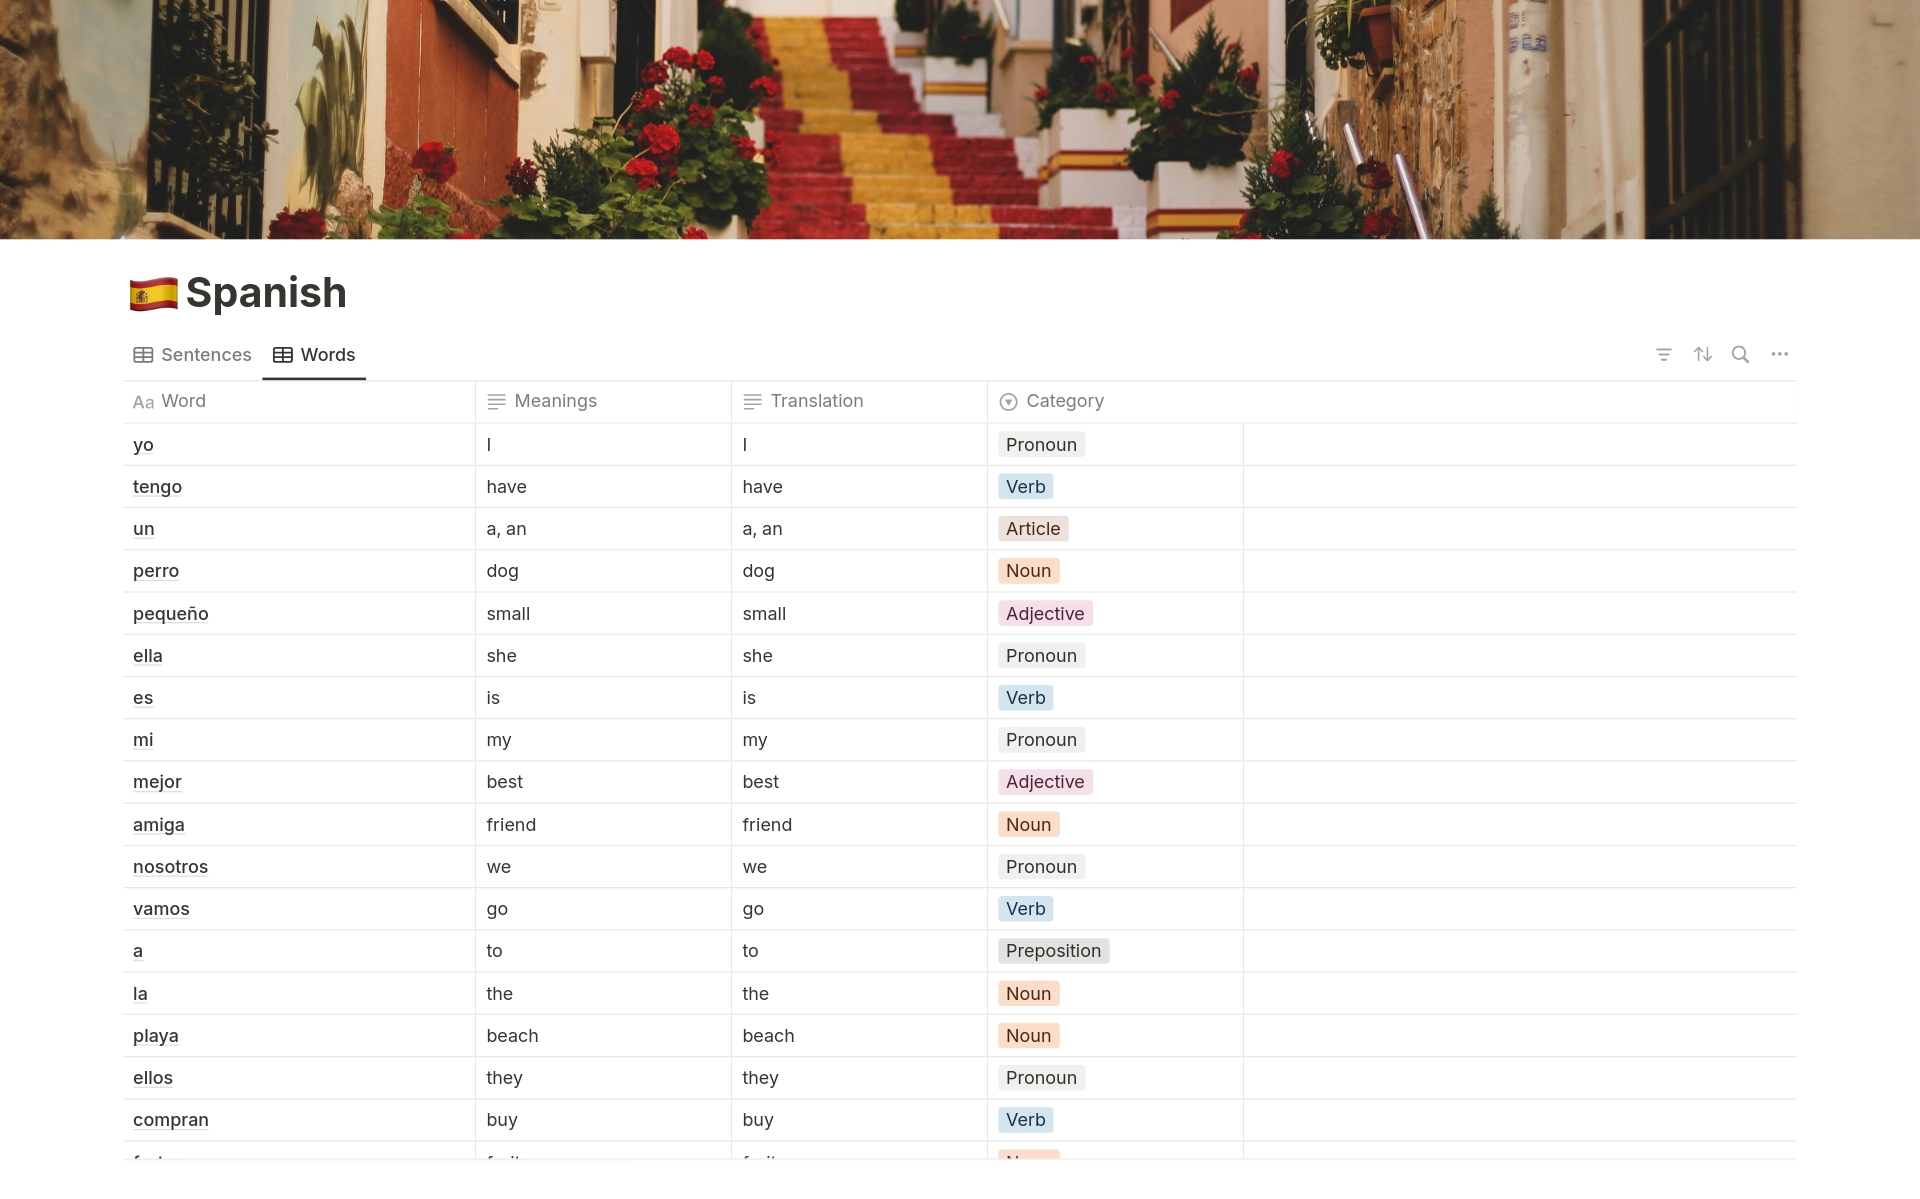 Explore the world of the Spanish language in an organized and efficient way with our exclusive Notion template for Spanish language learning! This vocabulary system is designed for those who want to master Spanish in a systematic and interactive manner.